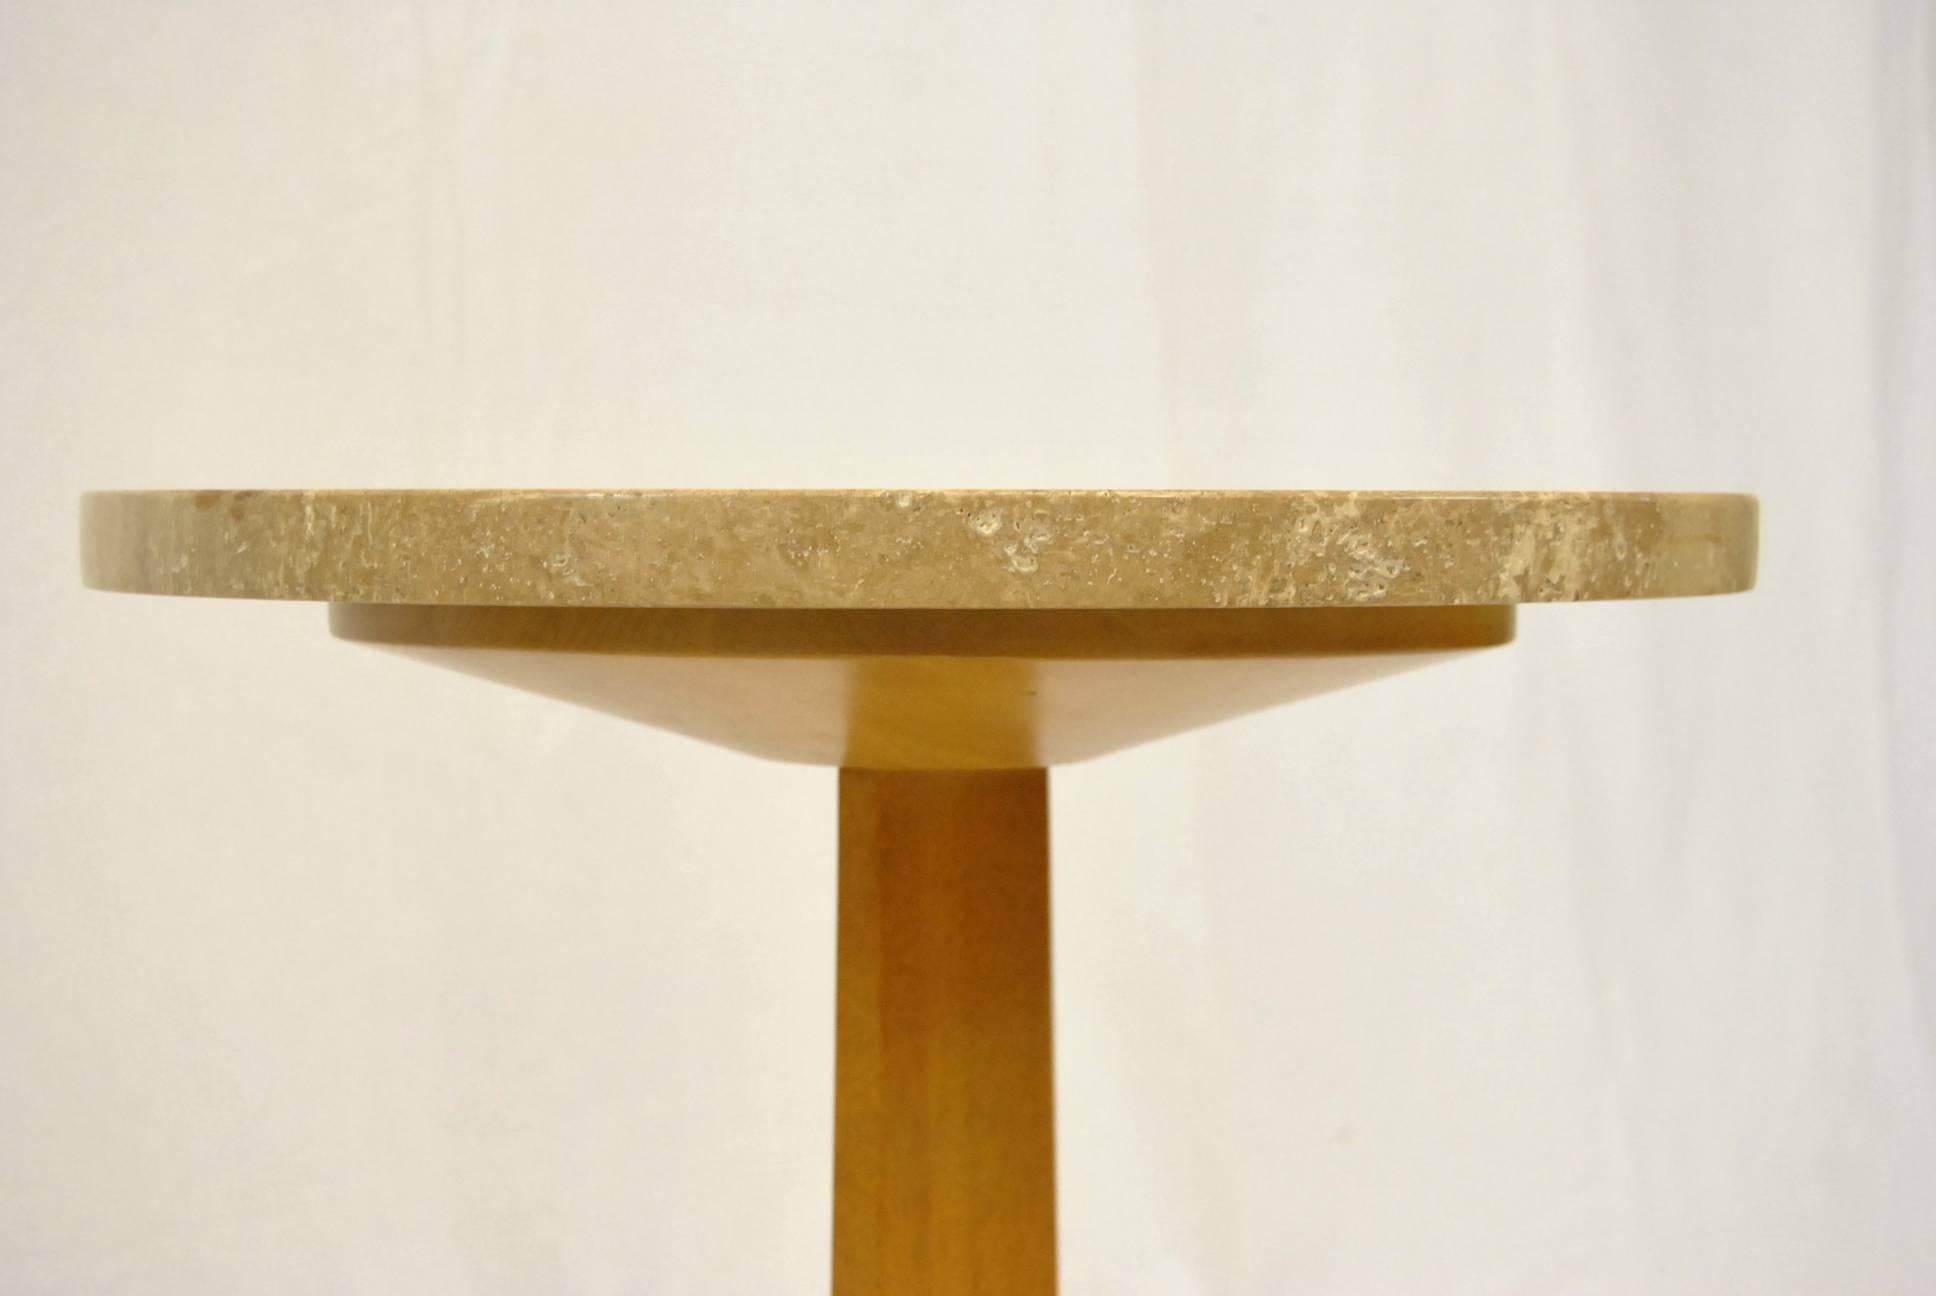 A great stand designed by Edward Wormley for Dunbar. Stand has a tripod base and is has a round travertine top. The Dunbar gold label is secured below the base. This is a great accent piece with multiple uses.